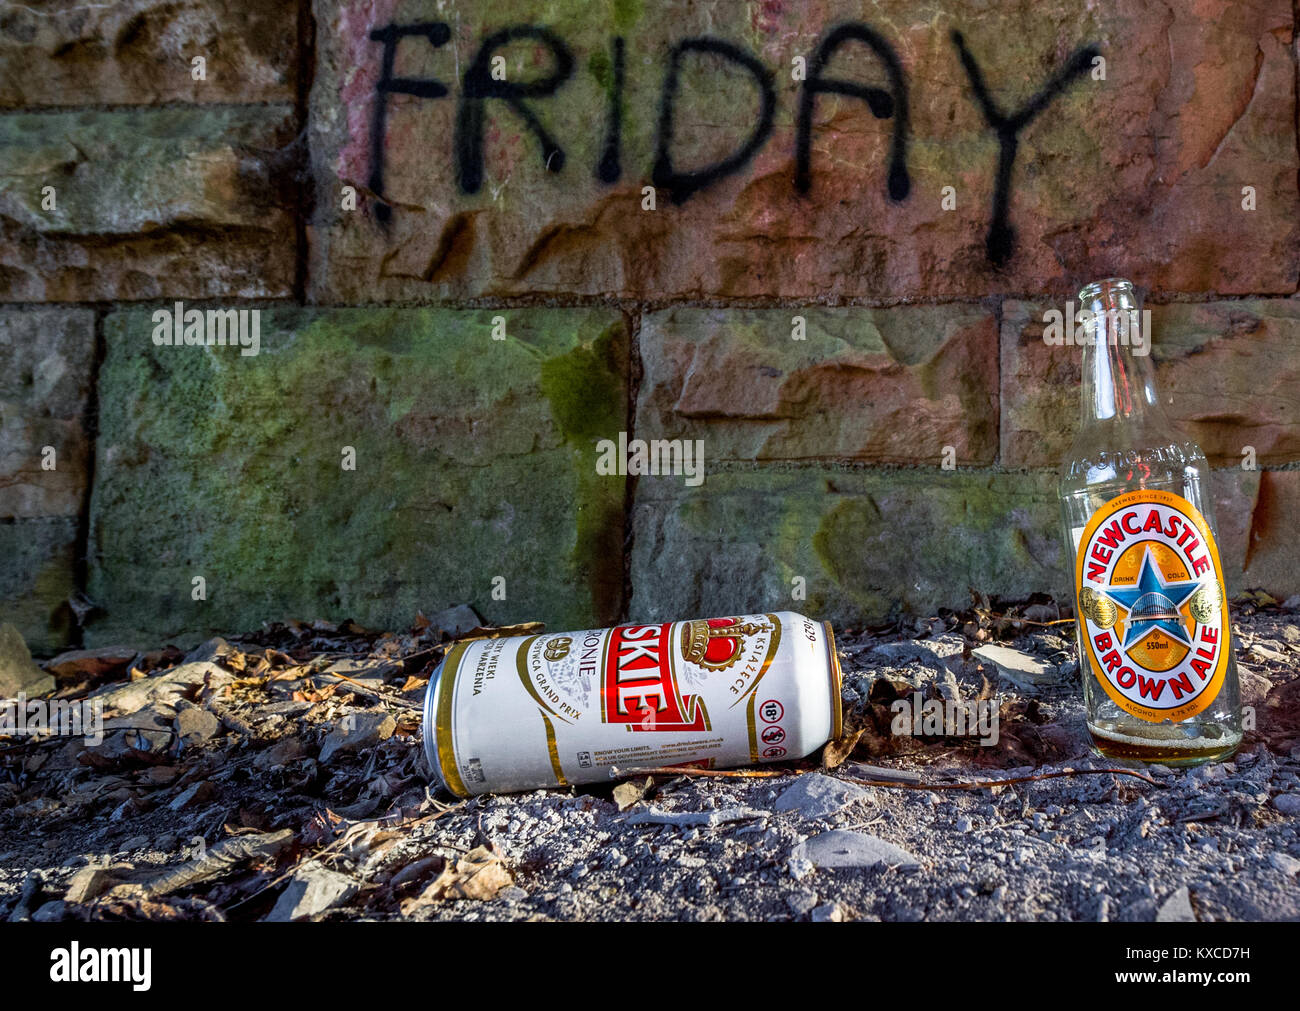 Empty and discarded beer bottle and can against a stone wall with Bad Friday sprayed onto it. Stock Photo